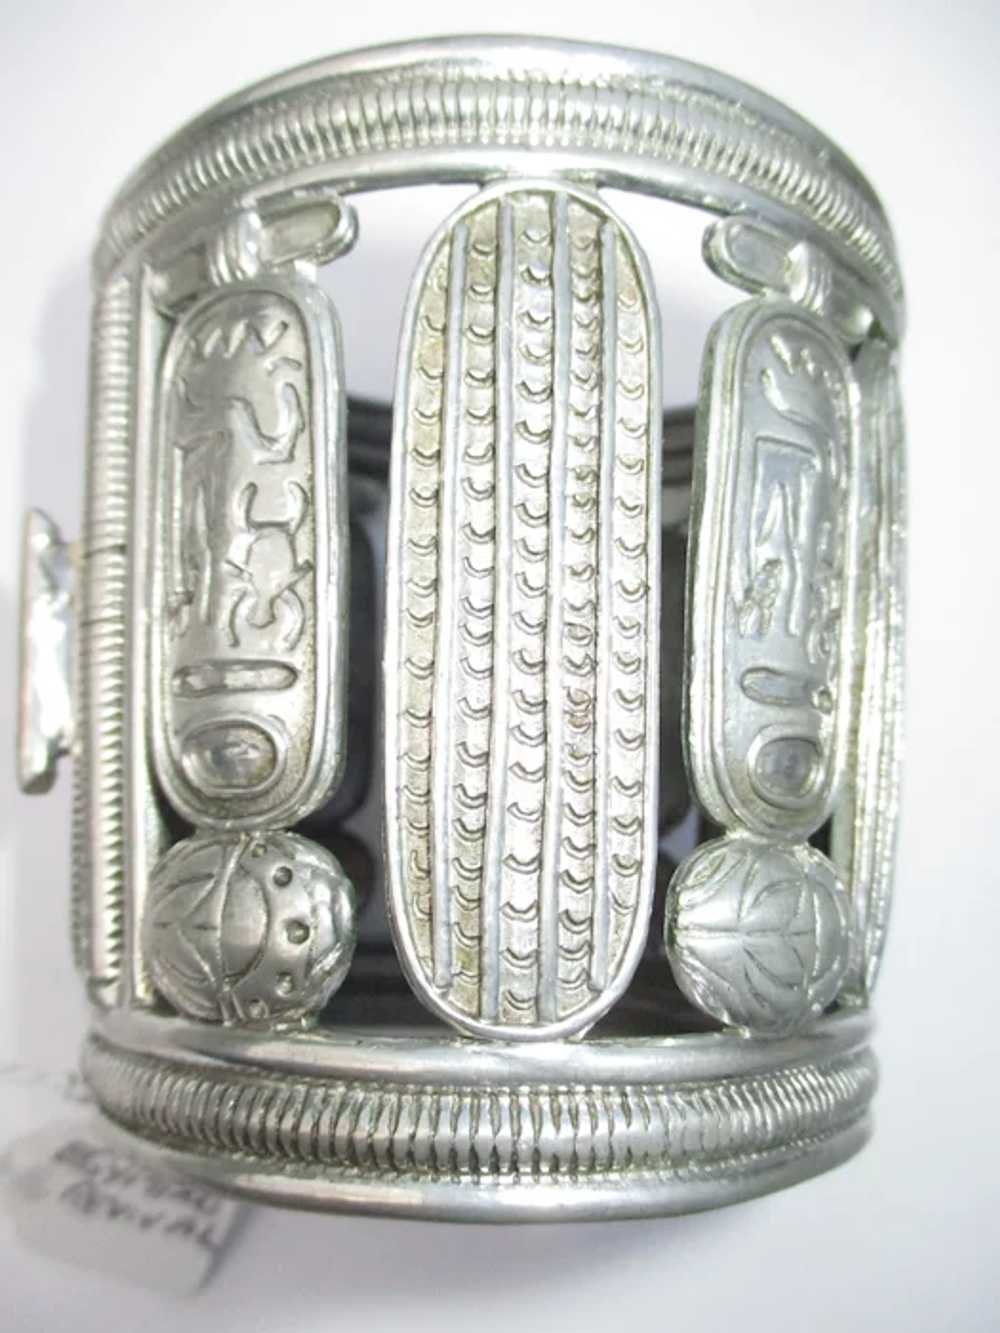 1940s Egyptian Revival Hinged Cuff - image 3